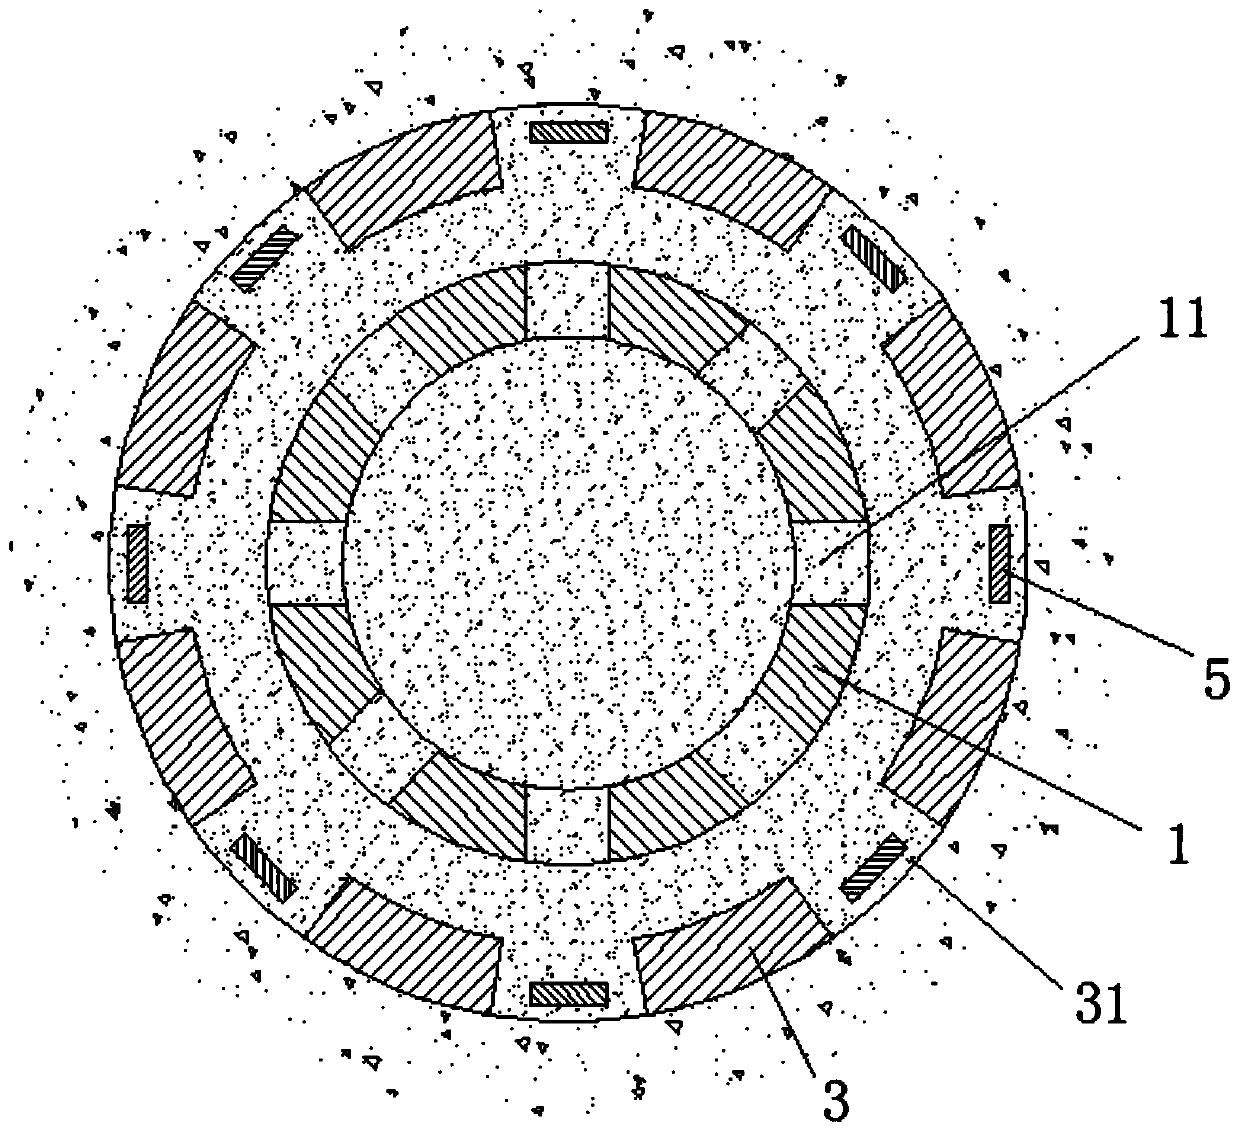 A connection structure and installation method of steel pipes for scaffolding